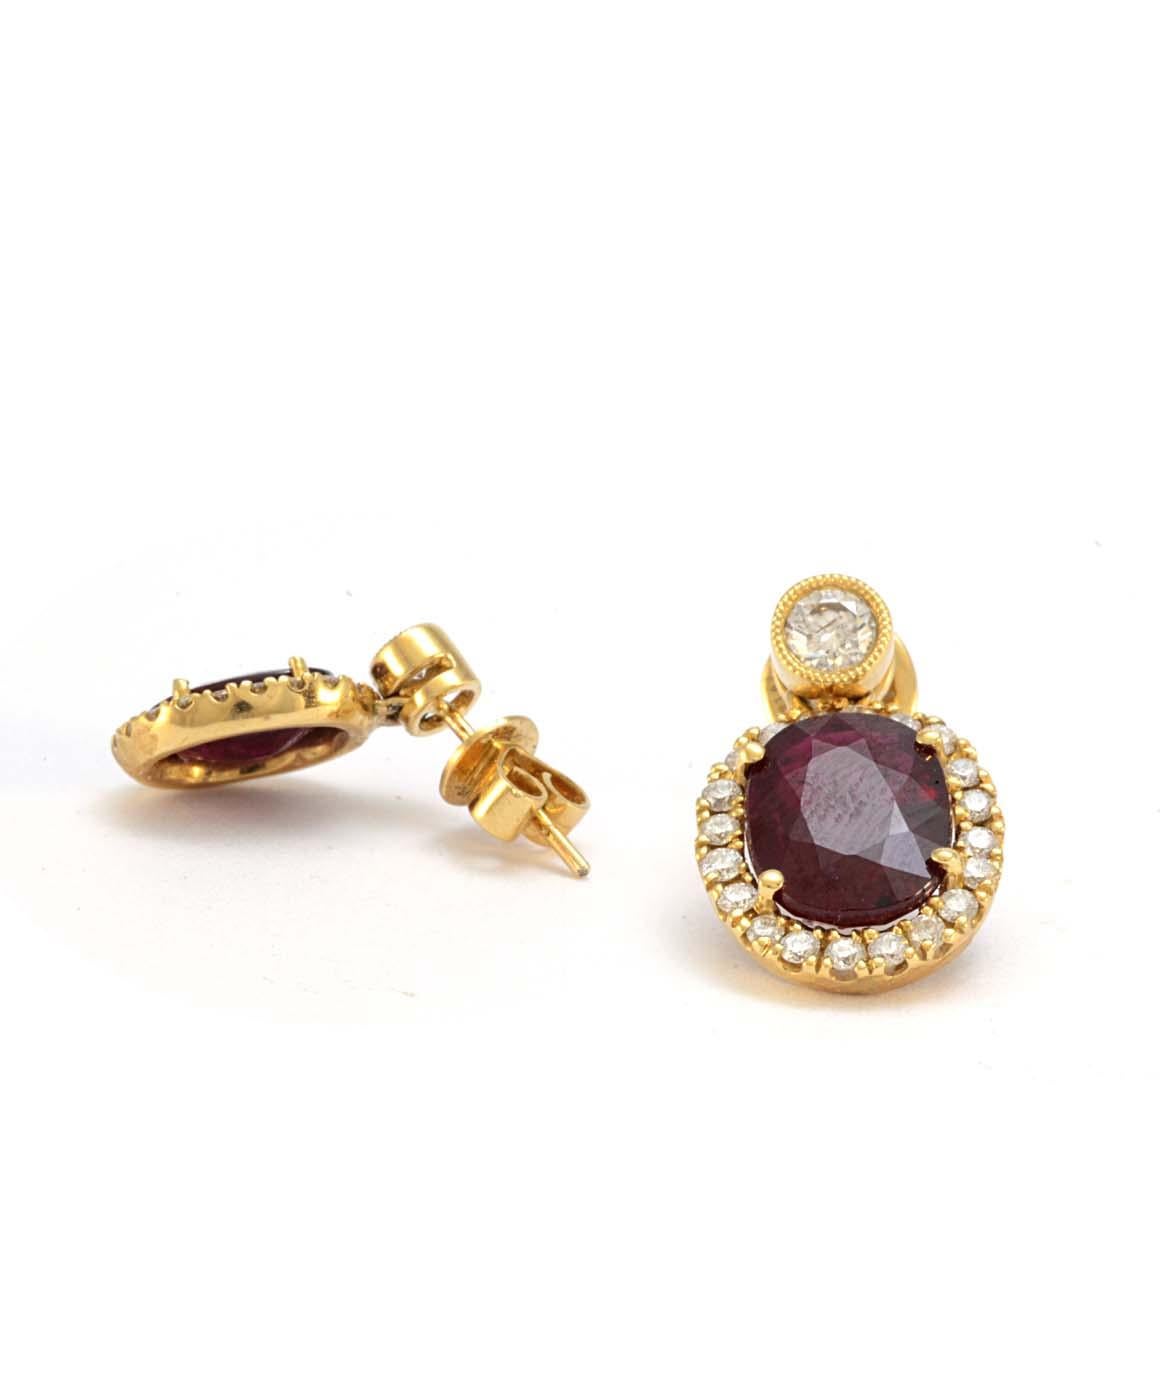 Women's or Men's Solid 18 Karat Yellow Gold Genuine Ruby and Natural Diamond Earrings 5.4g